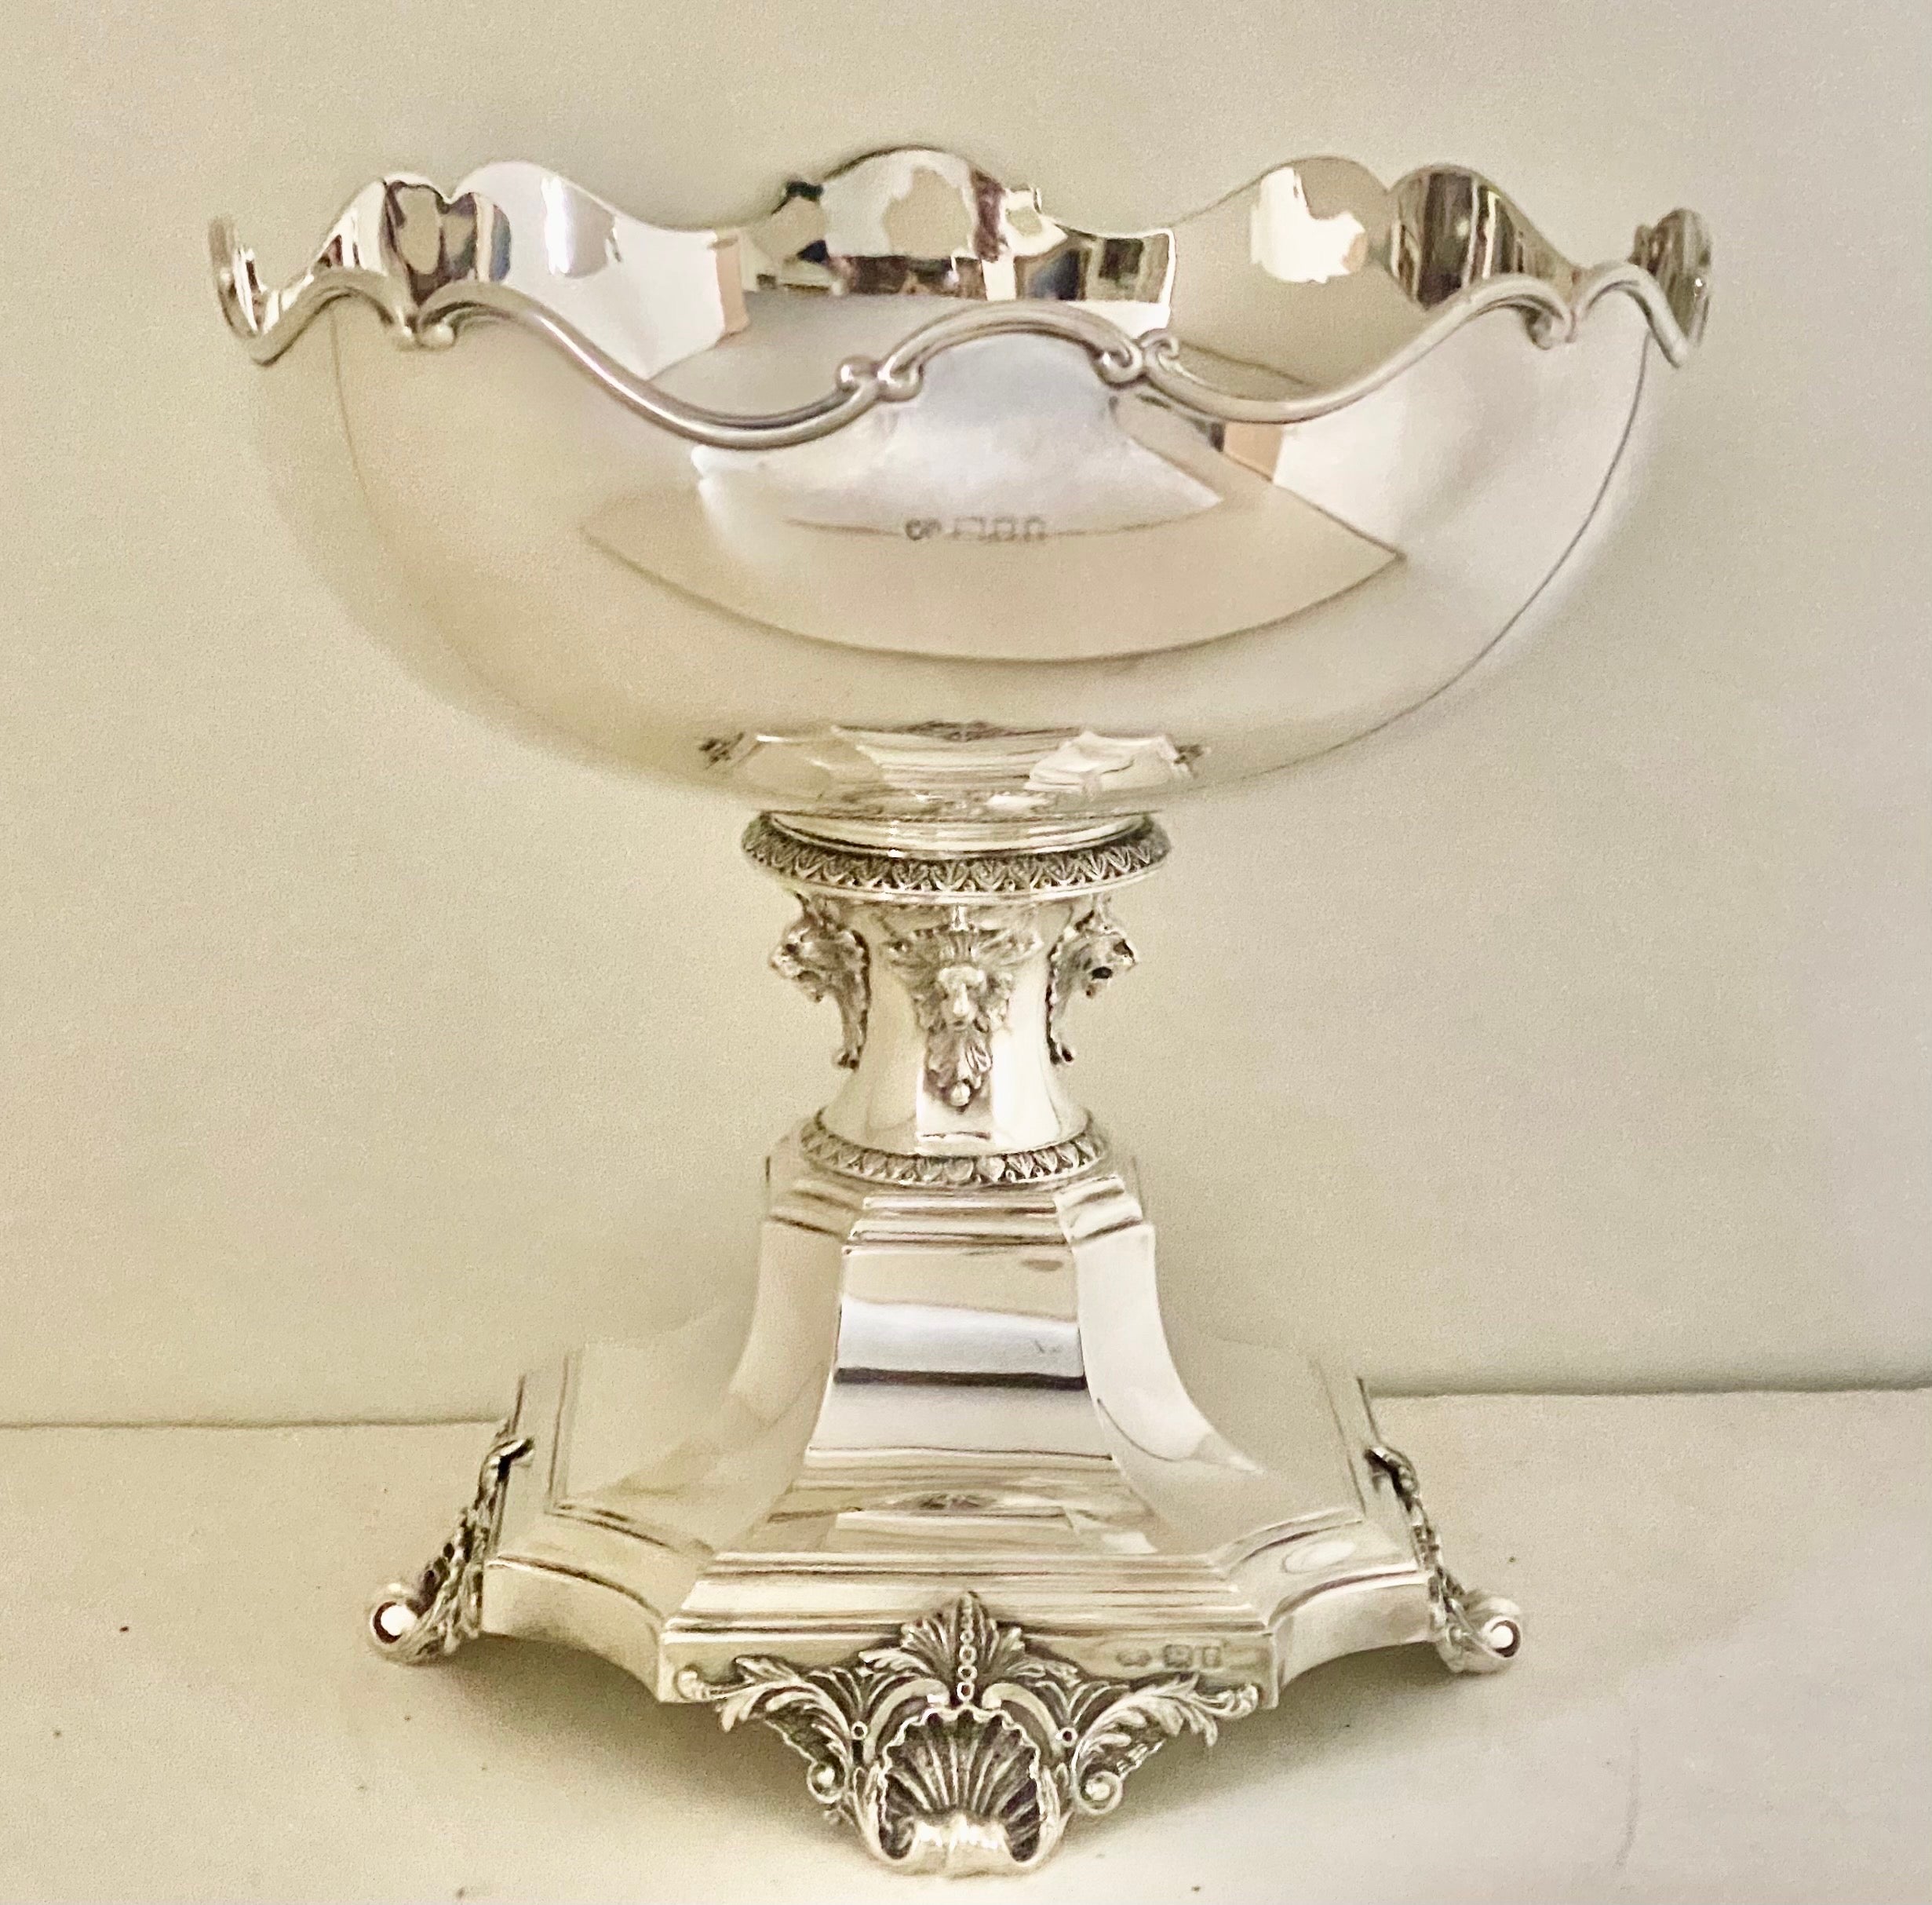 Antique 19th century Victorian solid silver centerpiece bowl, impressive Size and highly decorative, of shaped circular form with four paw feet, the sides applied with lion masks 
Each part is Hallmarked English Silver (925 Standard), London,